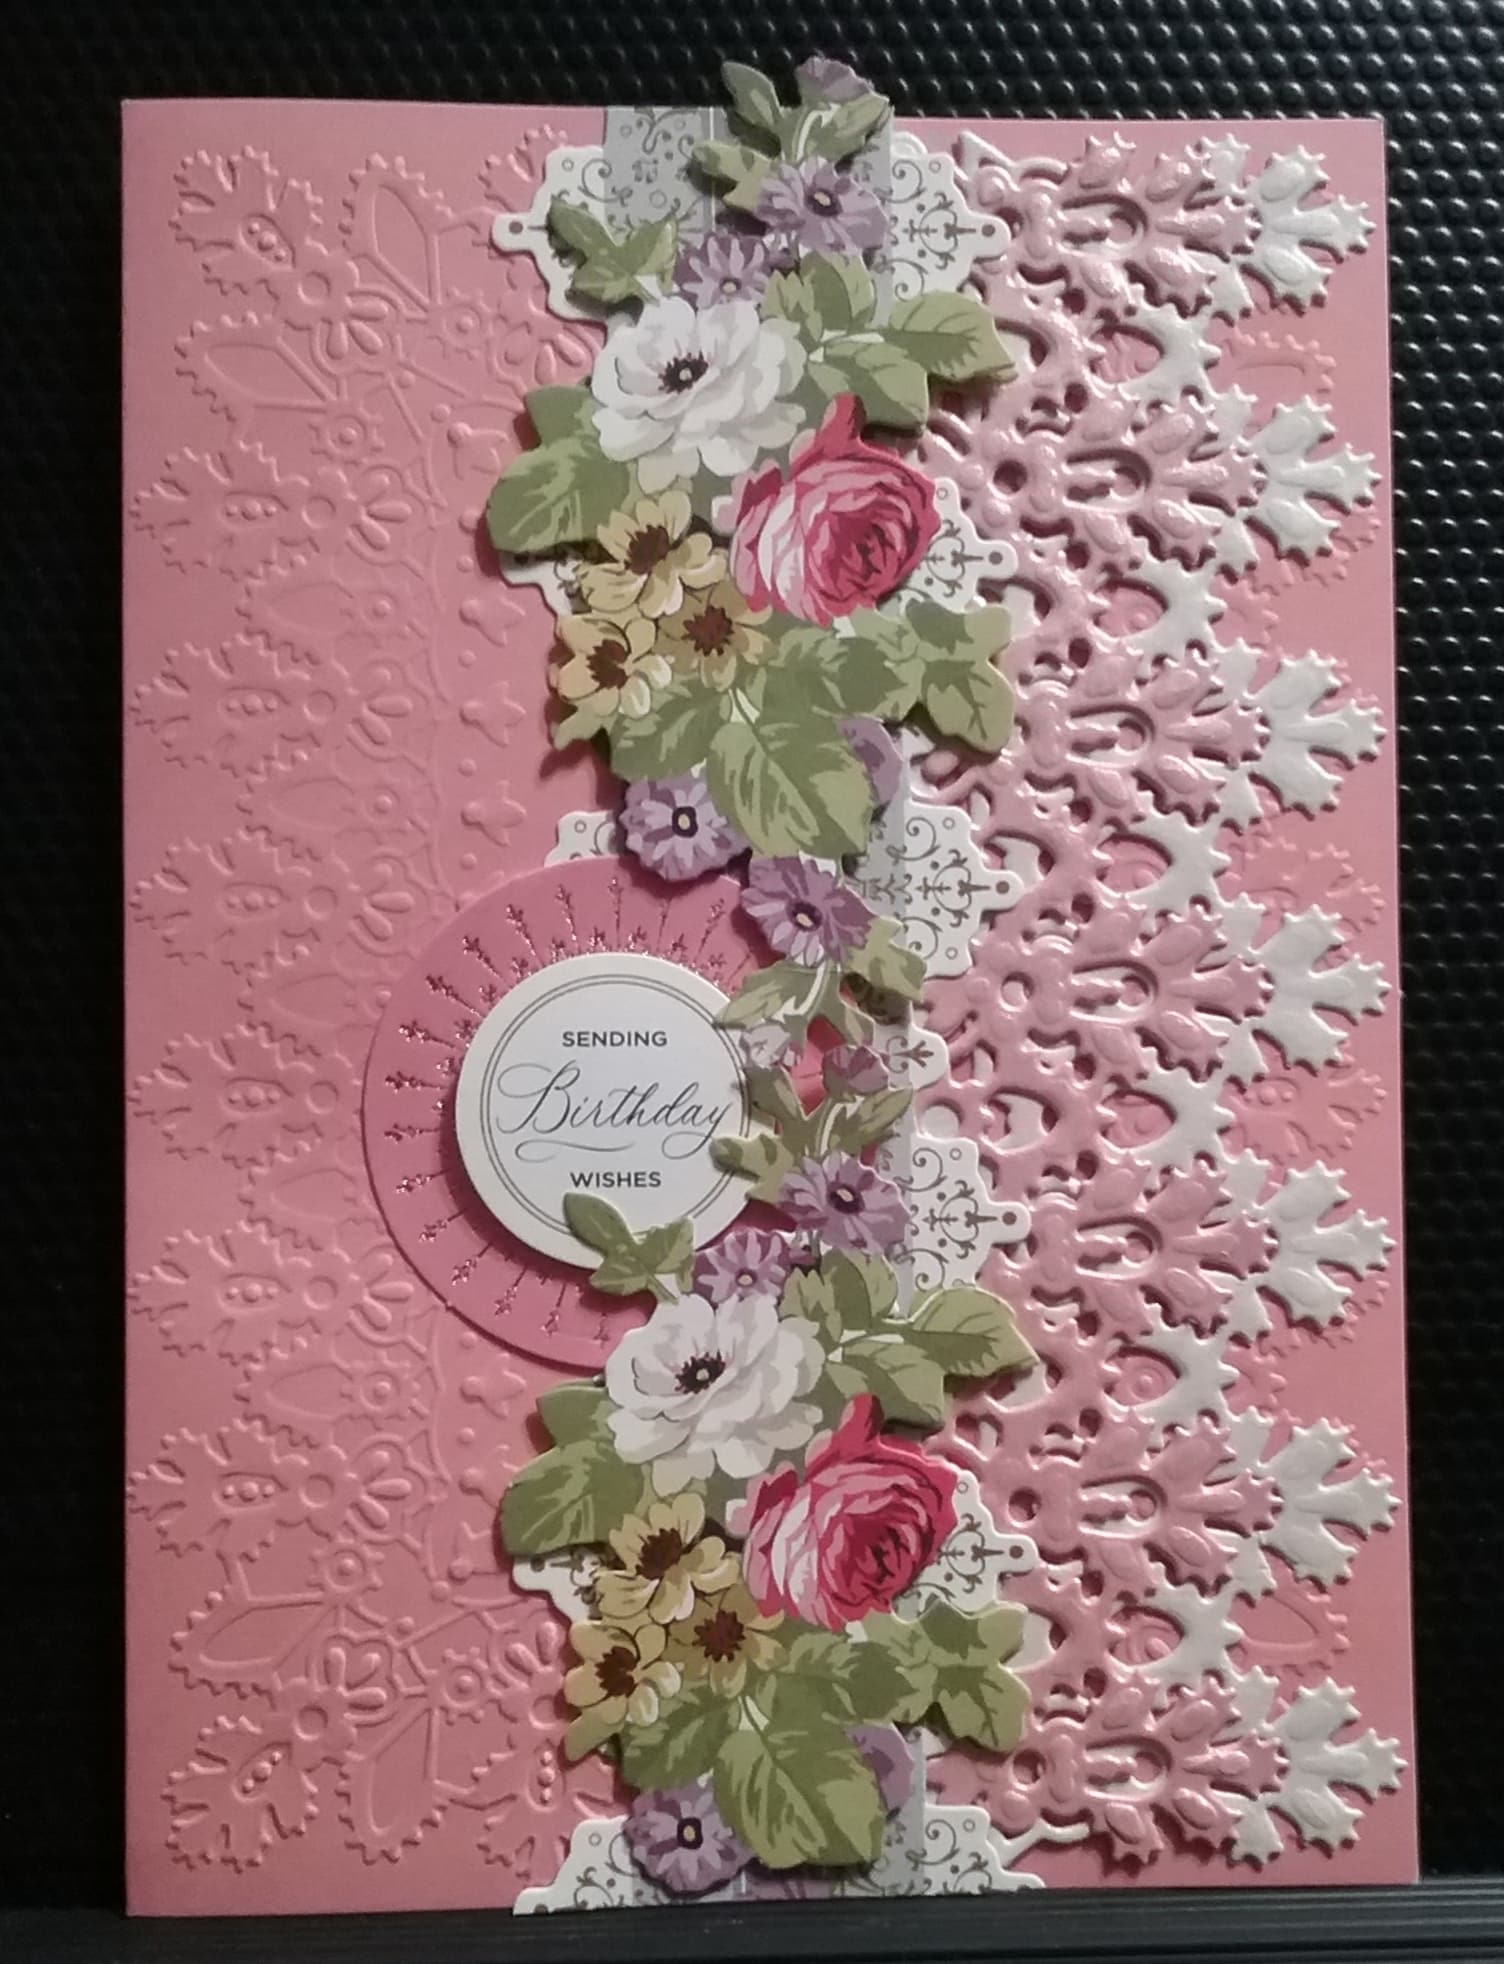 A pink card with lace and flowers.